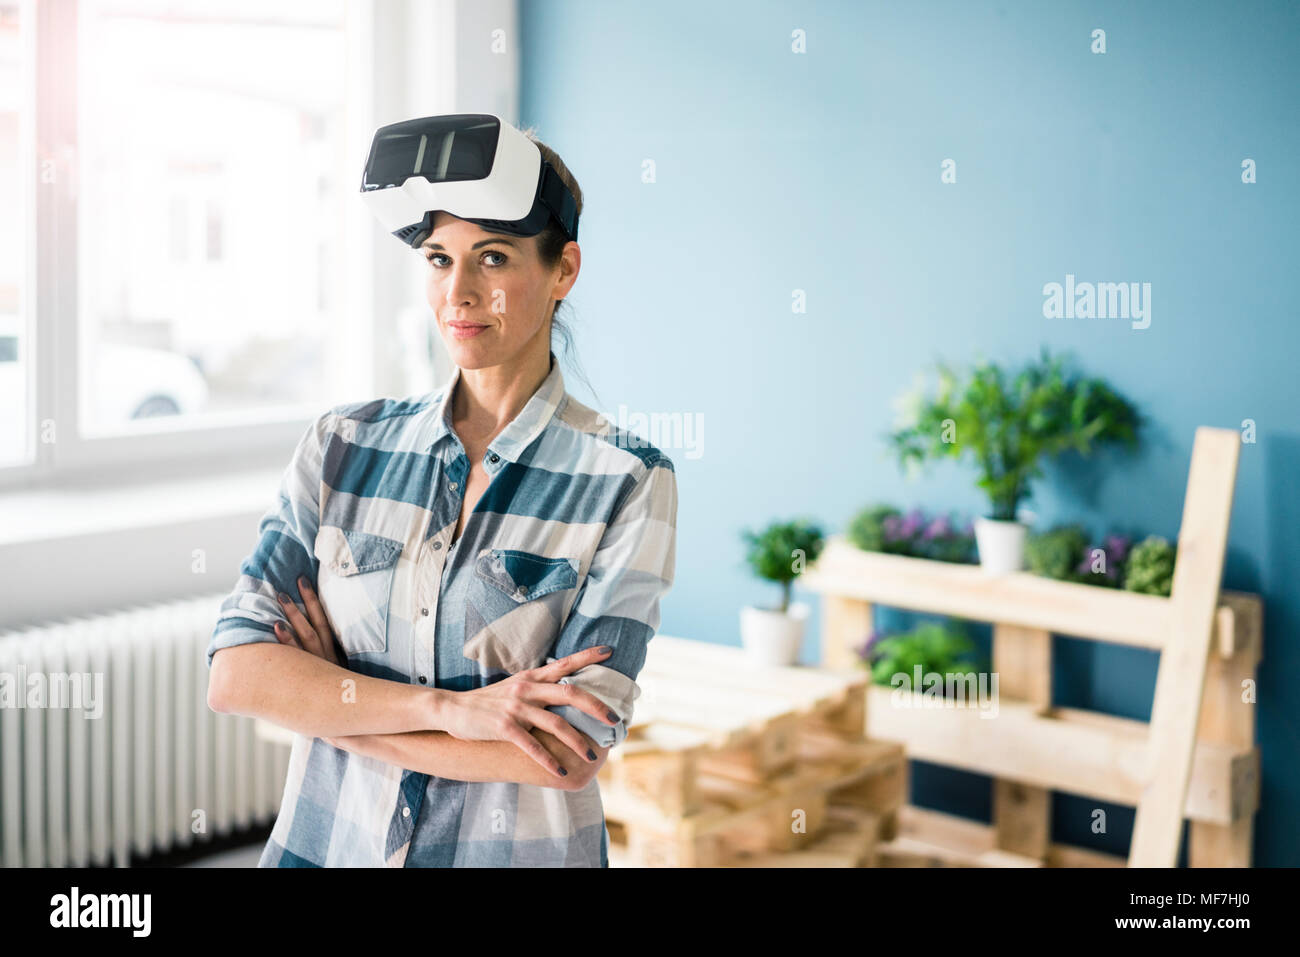 Woman using VR glasses, renovating her new home Stock Photo